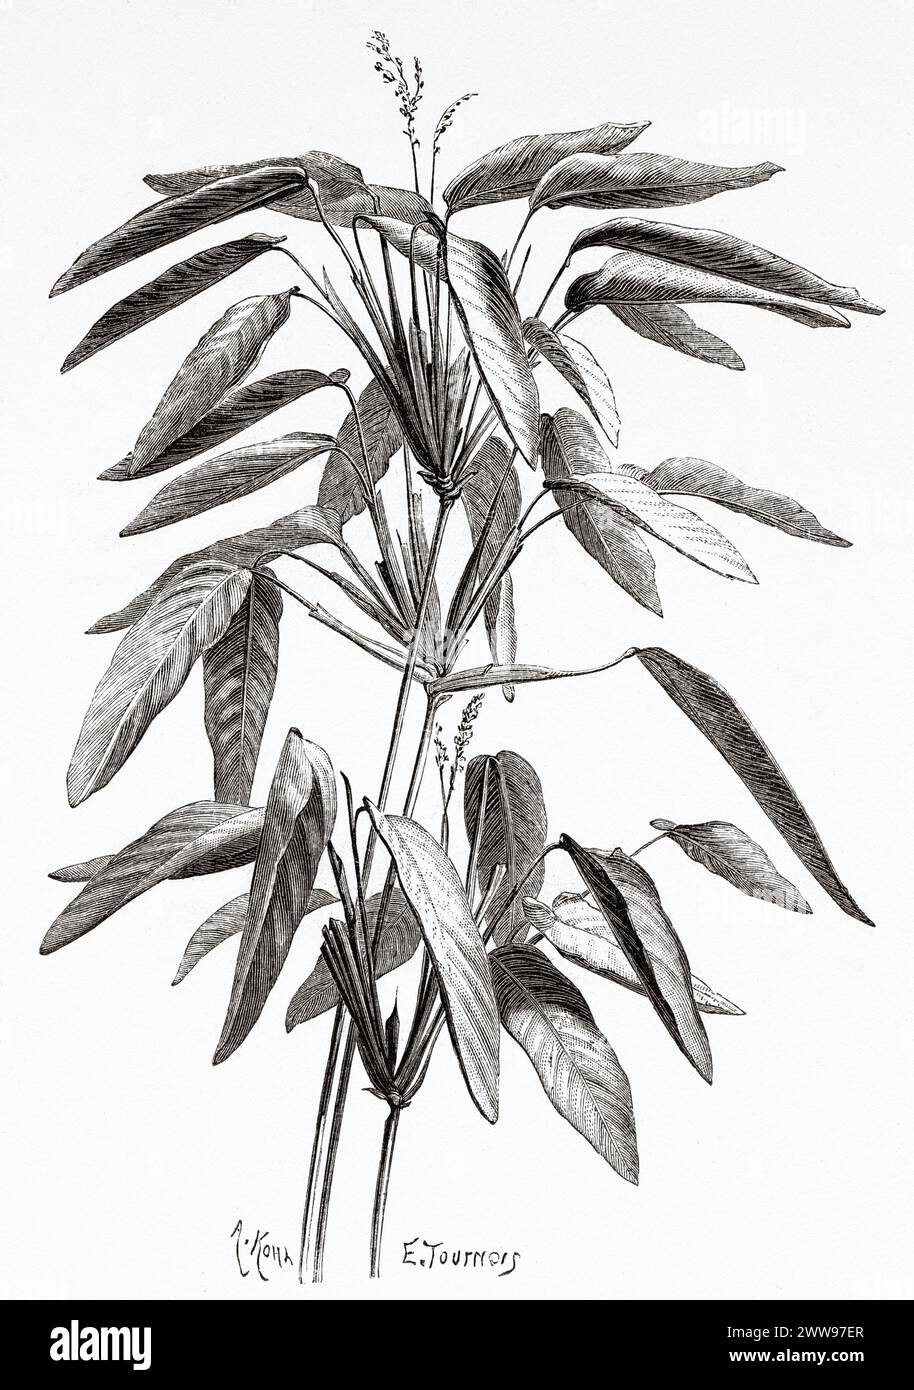 Ischnosiphon arouma, neotropical herbaceous species belonging to the Marantaceae family. It is well known in the Amazon and the Guiana Plateau for its uses in traditional basketry. In Guyana it is called arouman, red arouman, waruma, wama, French Guiana, South America. Drawing by Tournois. From Cayenne to the Andes (1878-1879) by Jules Crevaux (1847 - 1882) Le Tour du Monde 1880 Stock Photo